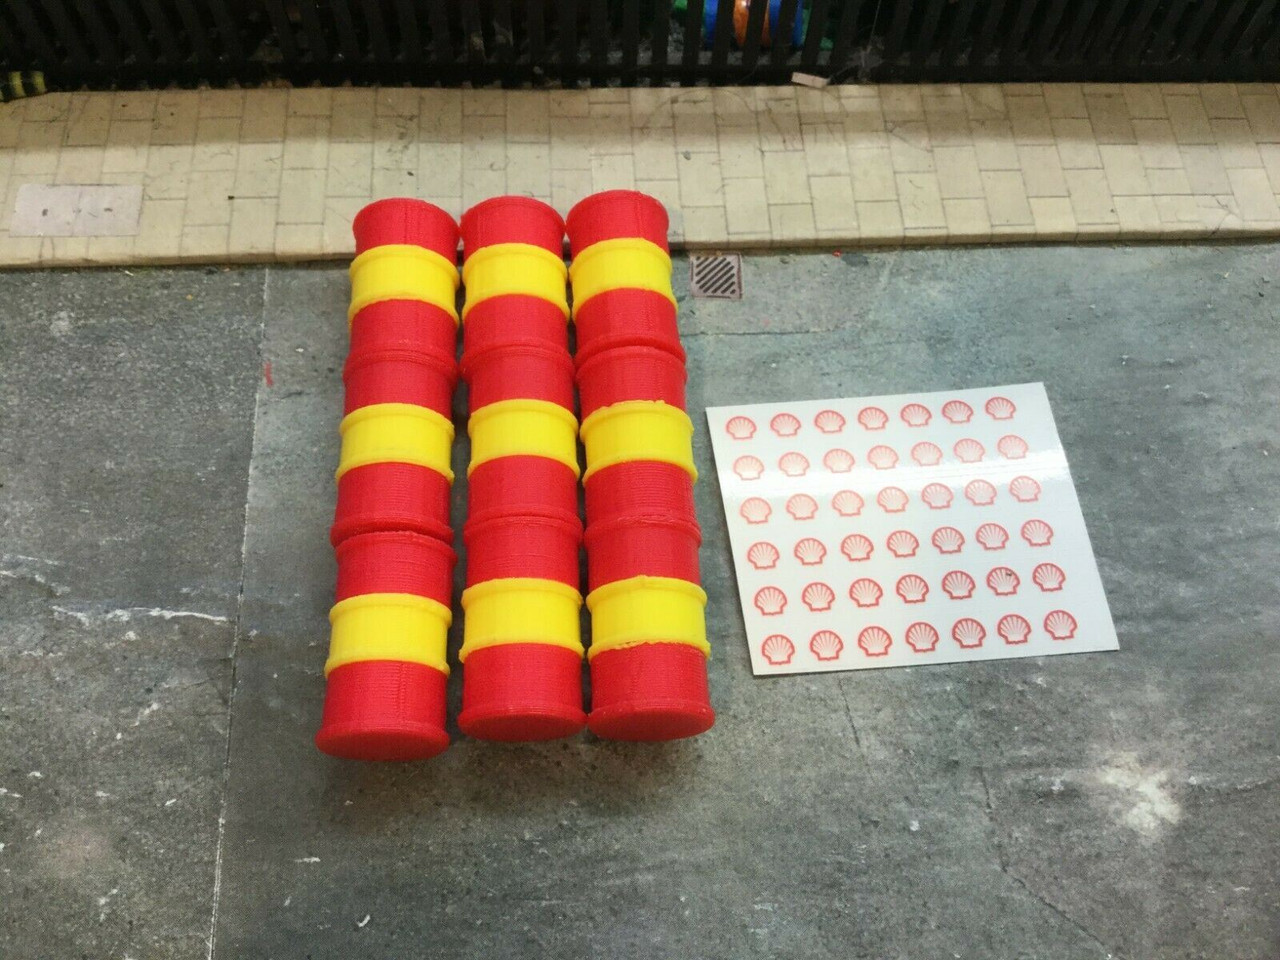 1/50  Shell Red & Yellow Oil Barrel 3D printed  x6